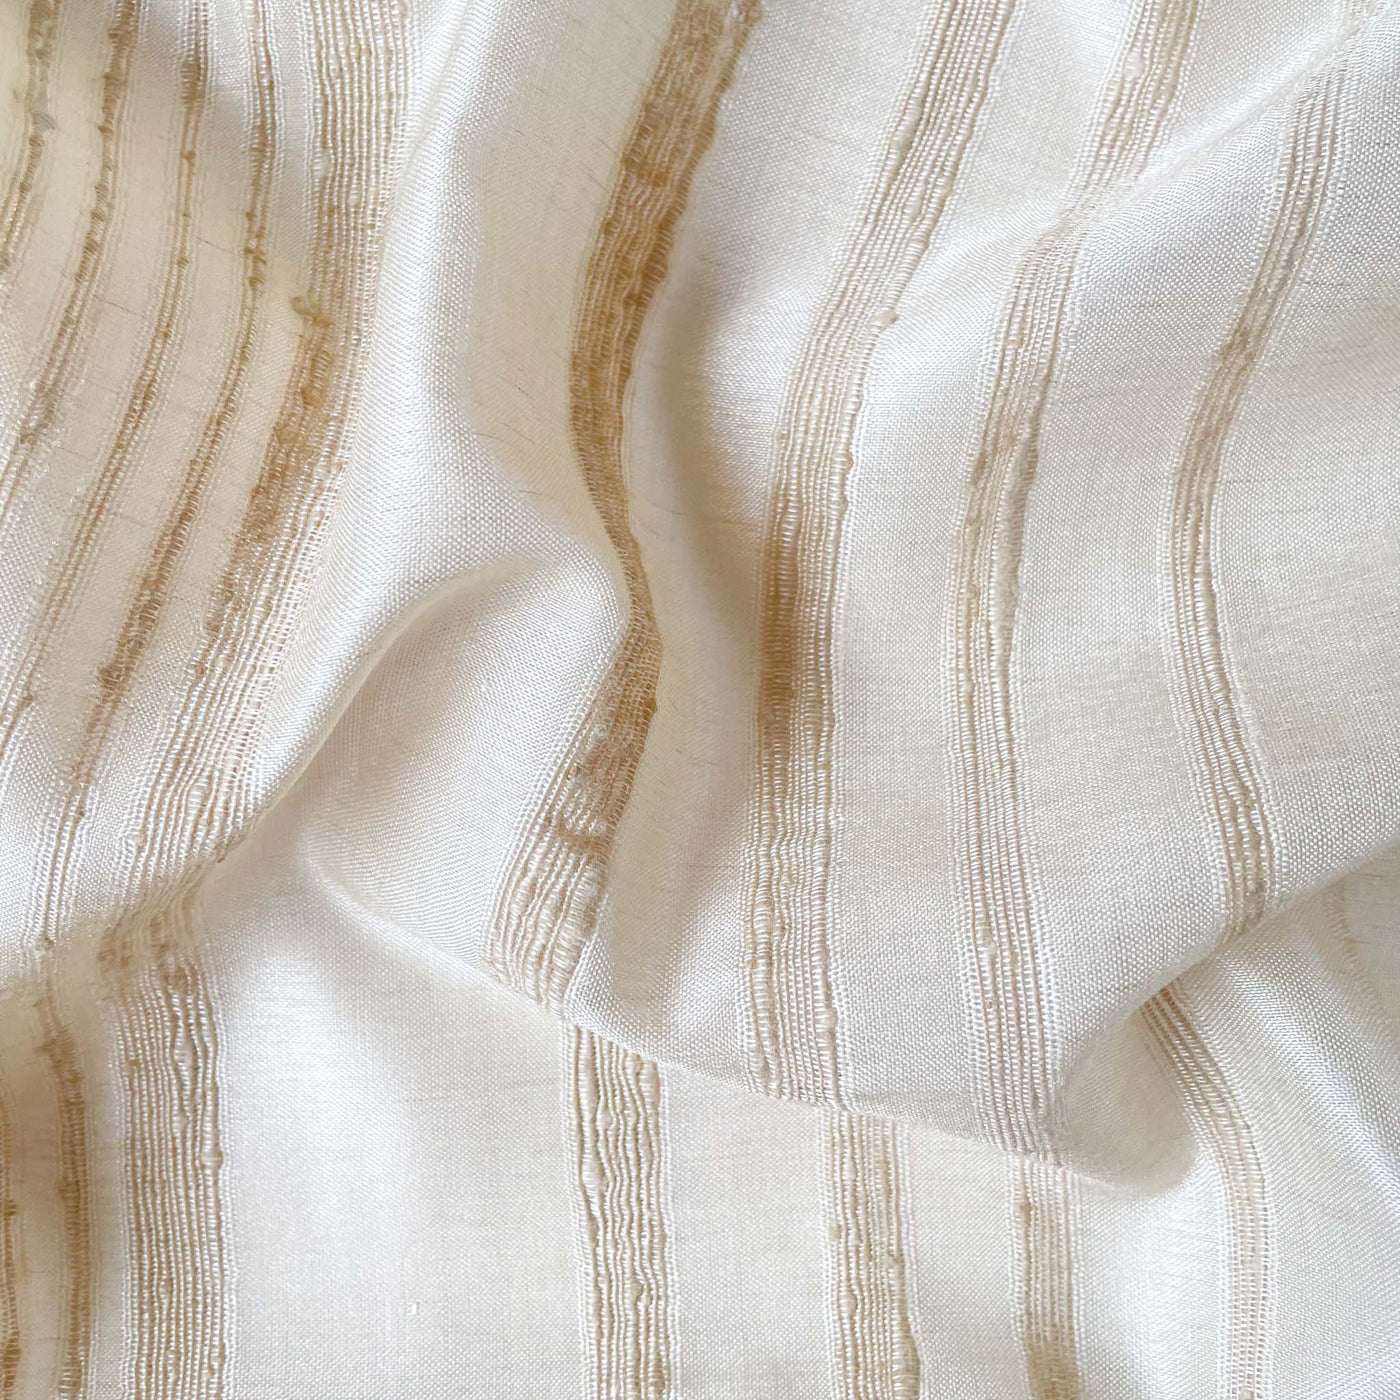 Unisex Off-White Color Dobby Stripes | Tussar Silk Kurta Fabric (2.5 Meters) | And Cotton Pyjama (2.5 Meters) | Unstitched Combo Set 